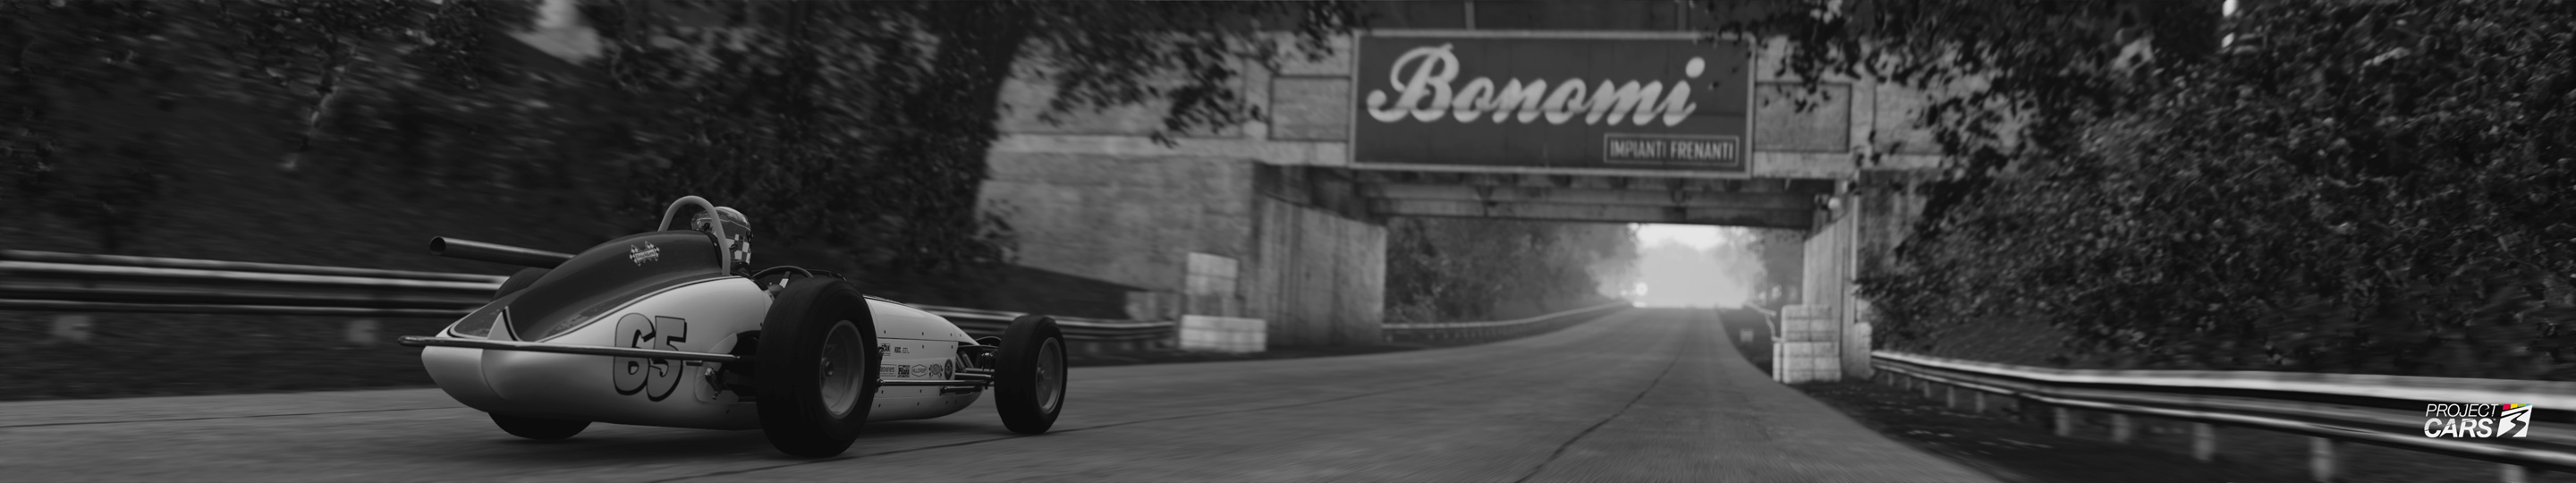 2 PROJECT CARS 3 WATSON ROADSTER at MONZA HISTORIC copy.jpg